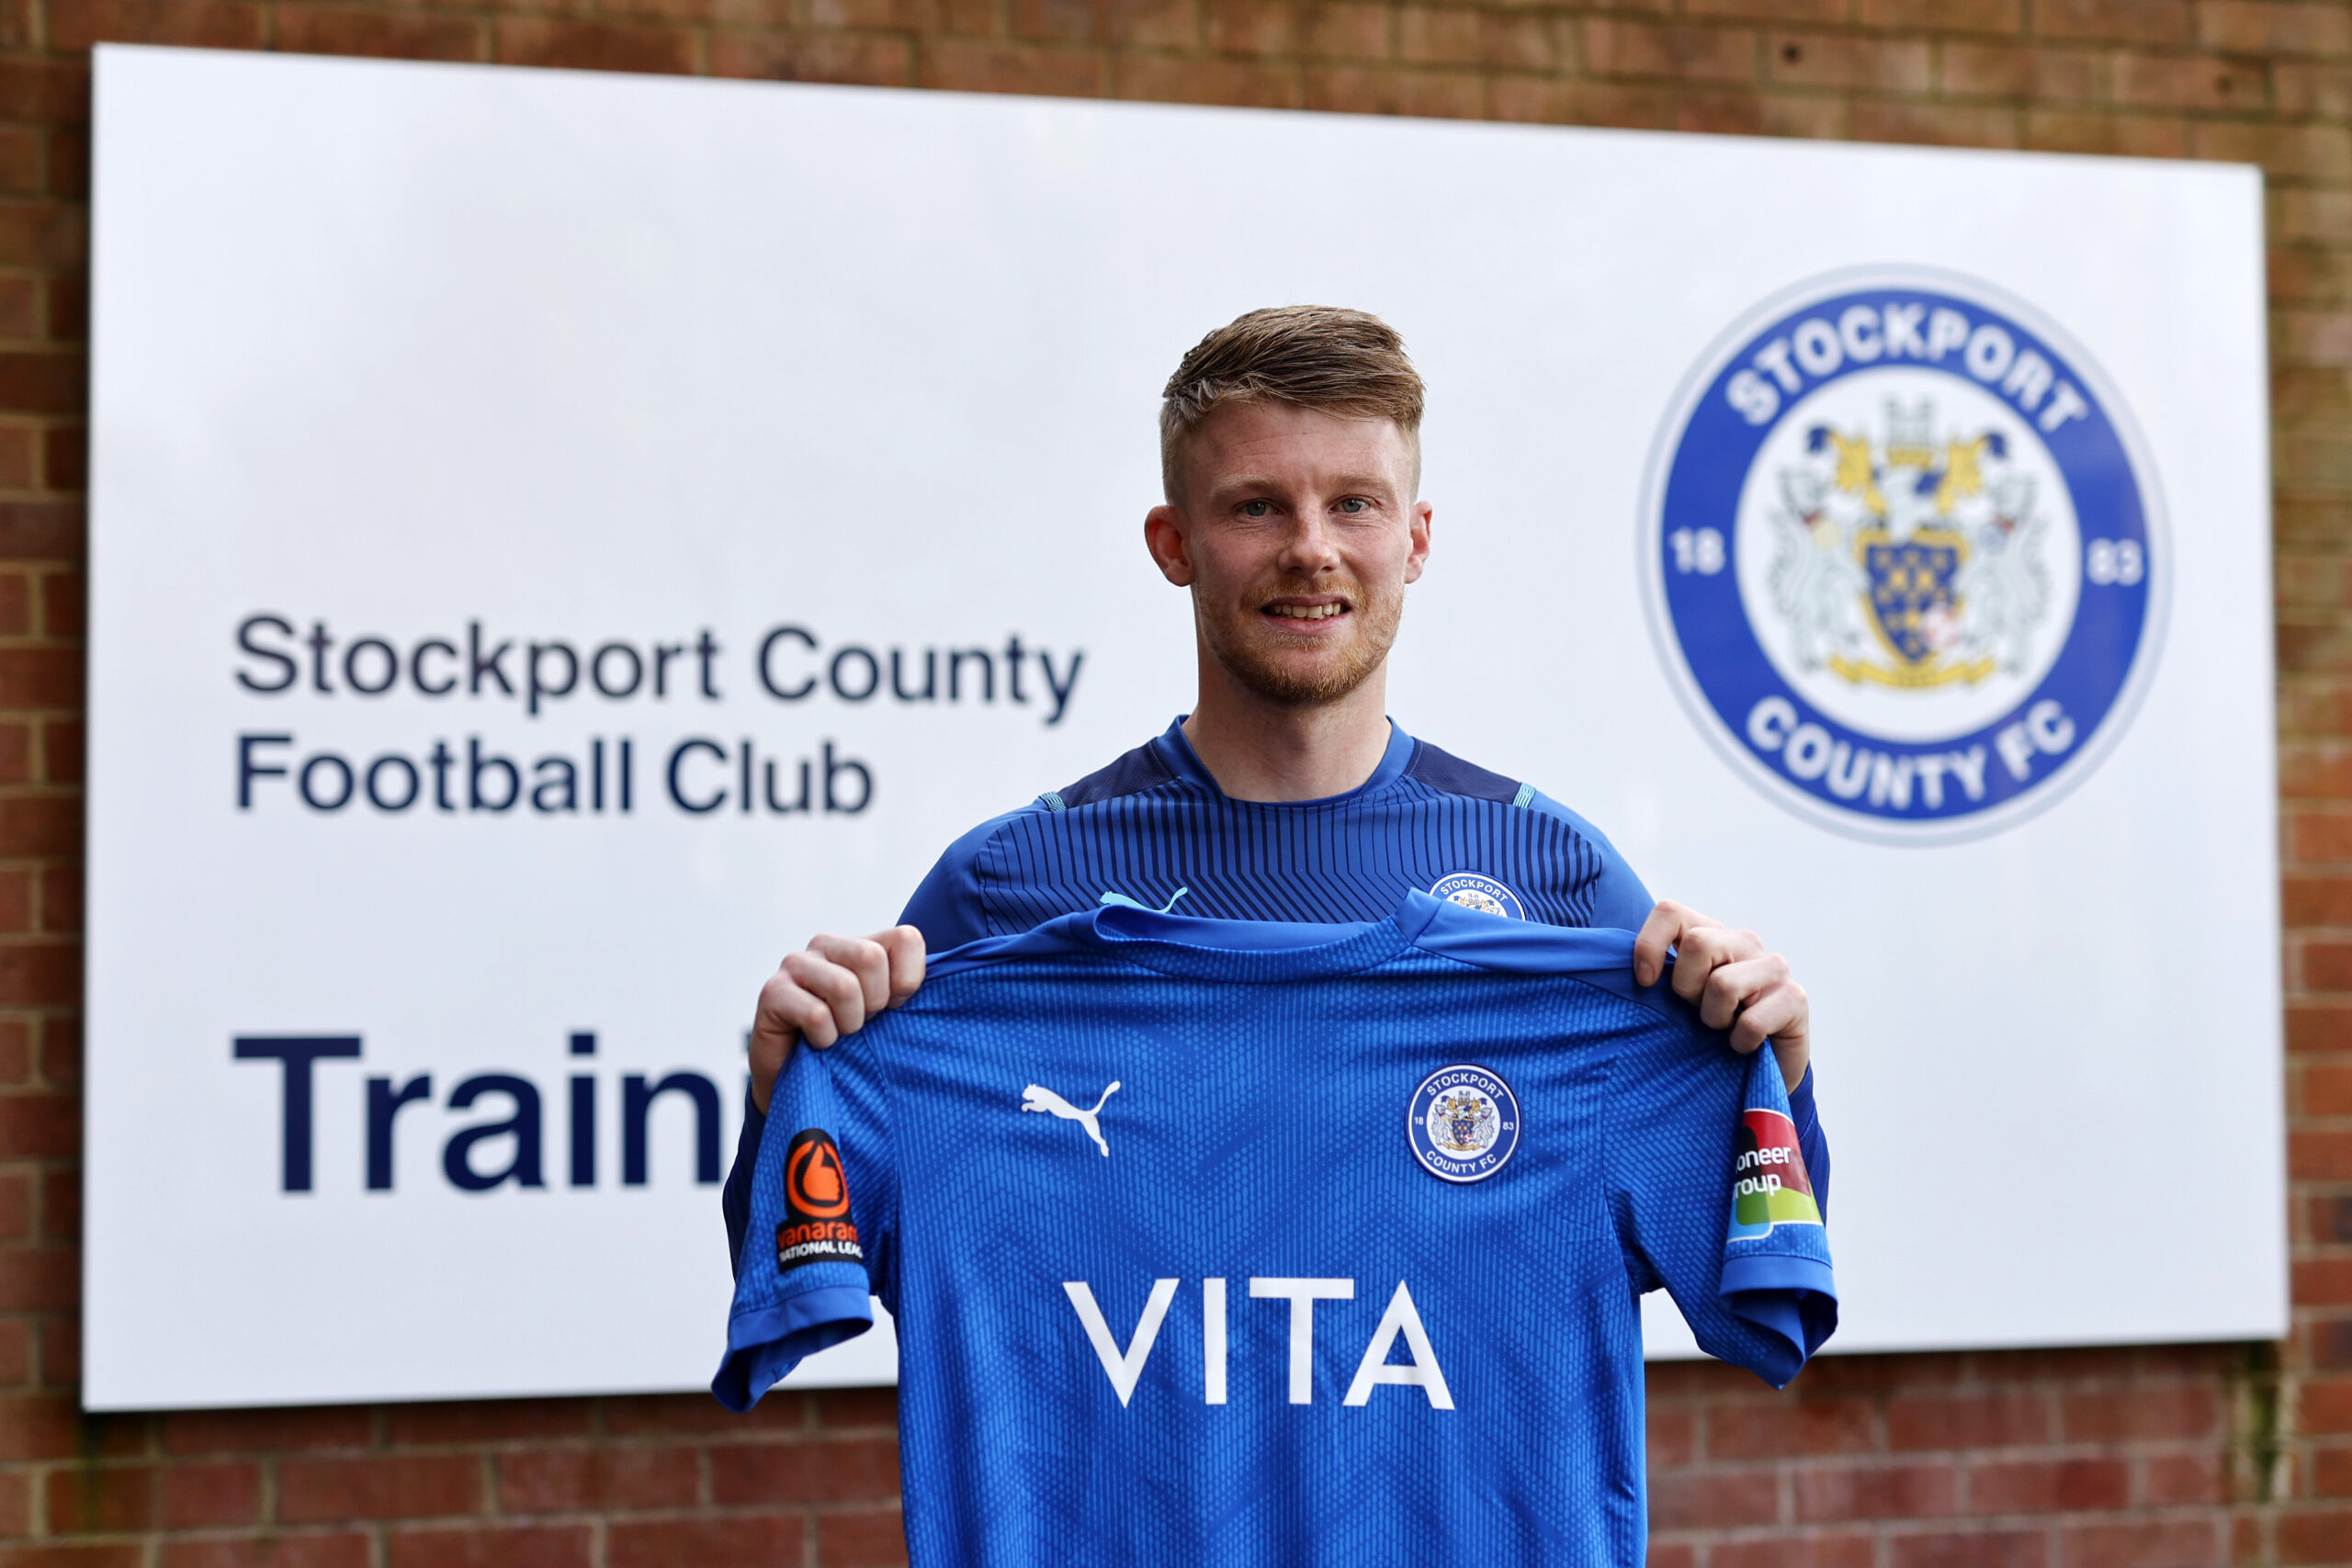 Cannon adds firepower to County's squad - Stockport County